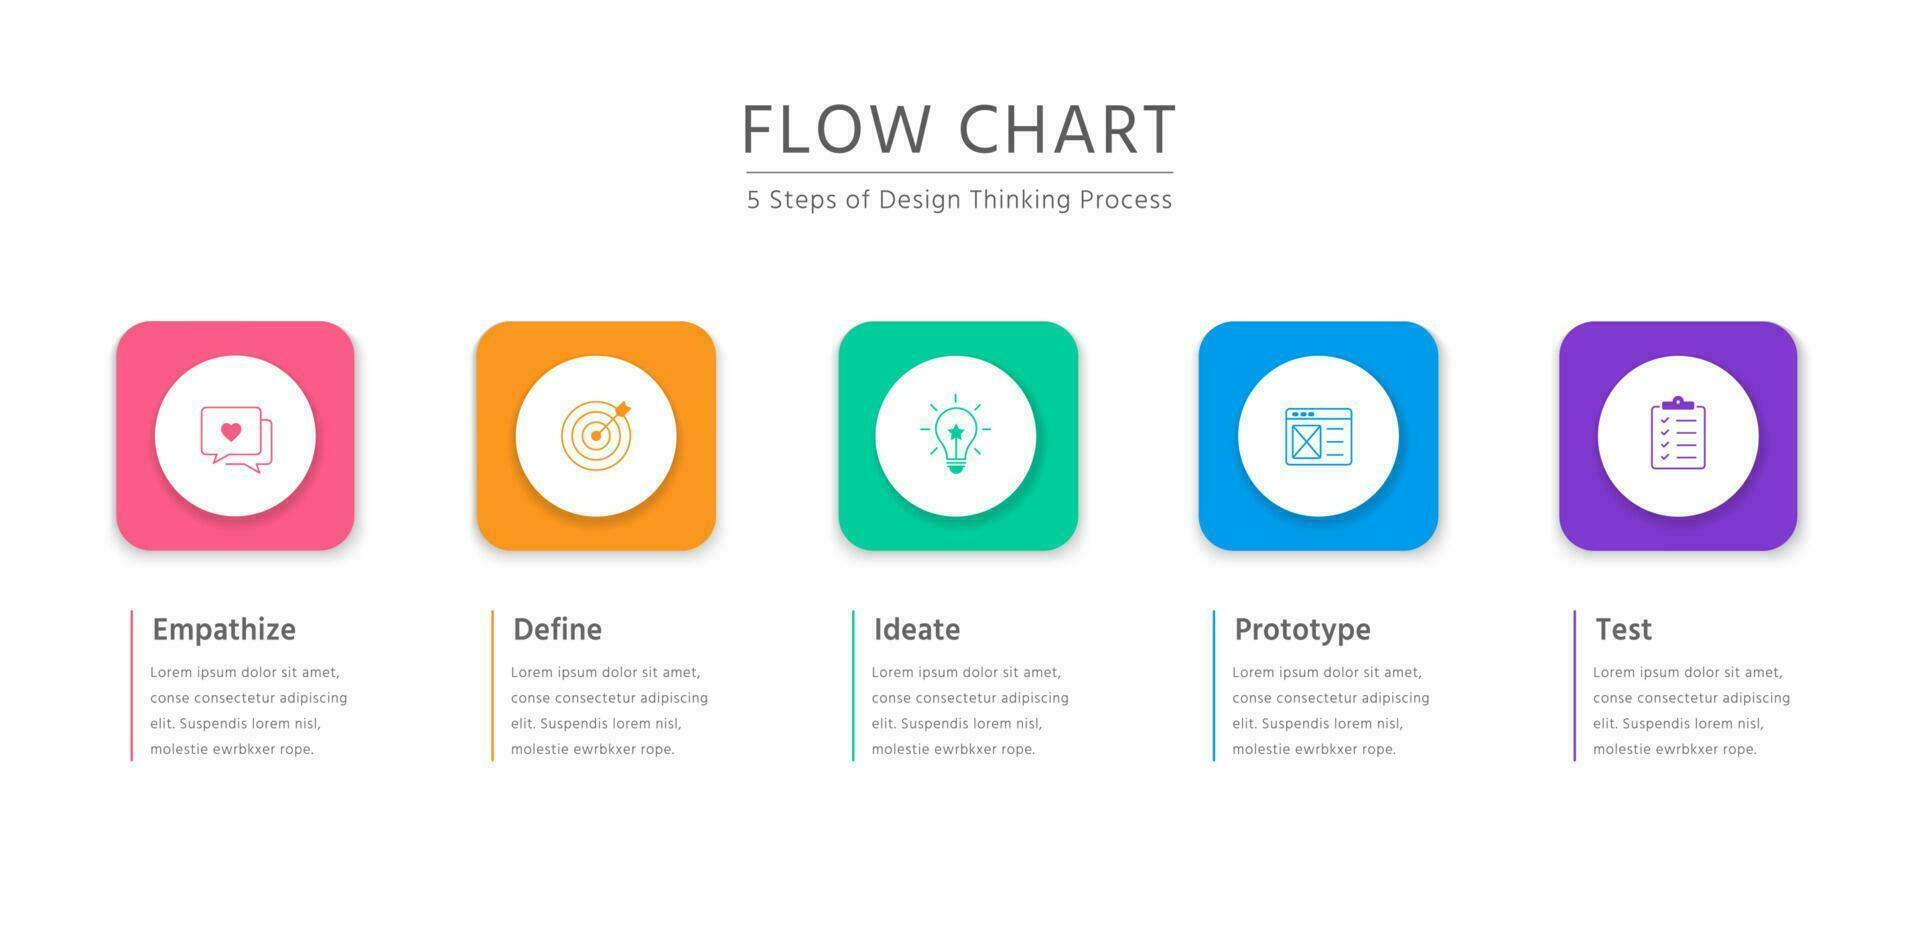 5 Steps of Design Thinking Process in horizontal colorful flow chart with emphasize, define, ideate, prototype, and test vector